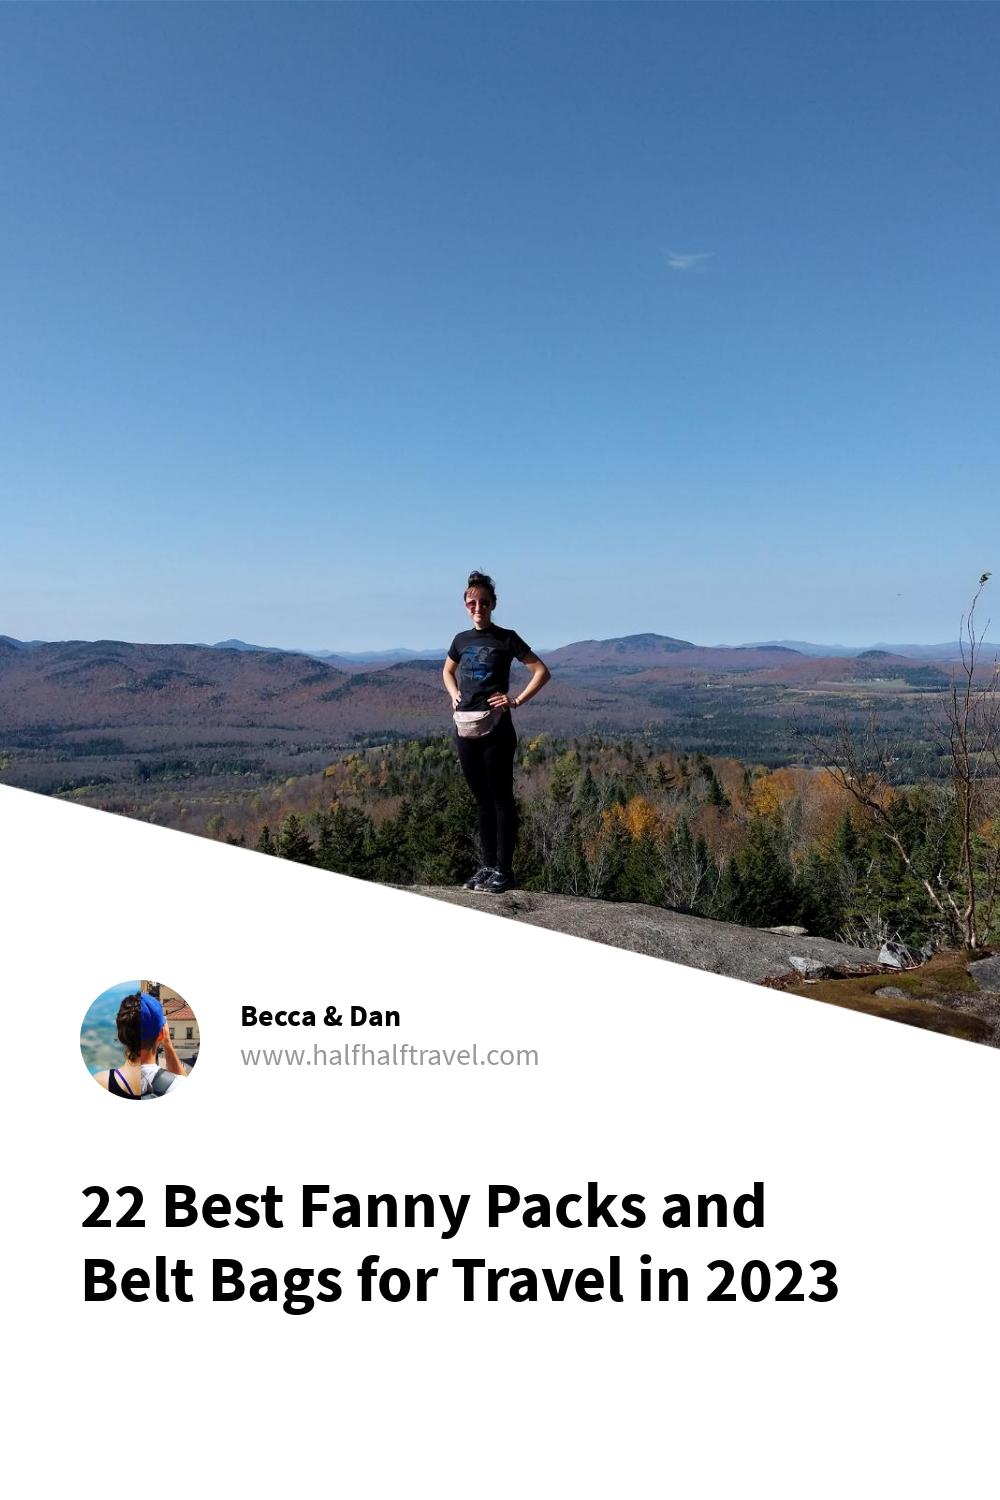 The Best Fanny Packs and Belt Bags for Festivals and More in 2023